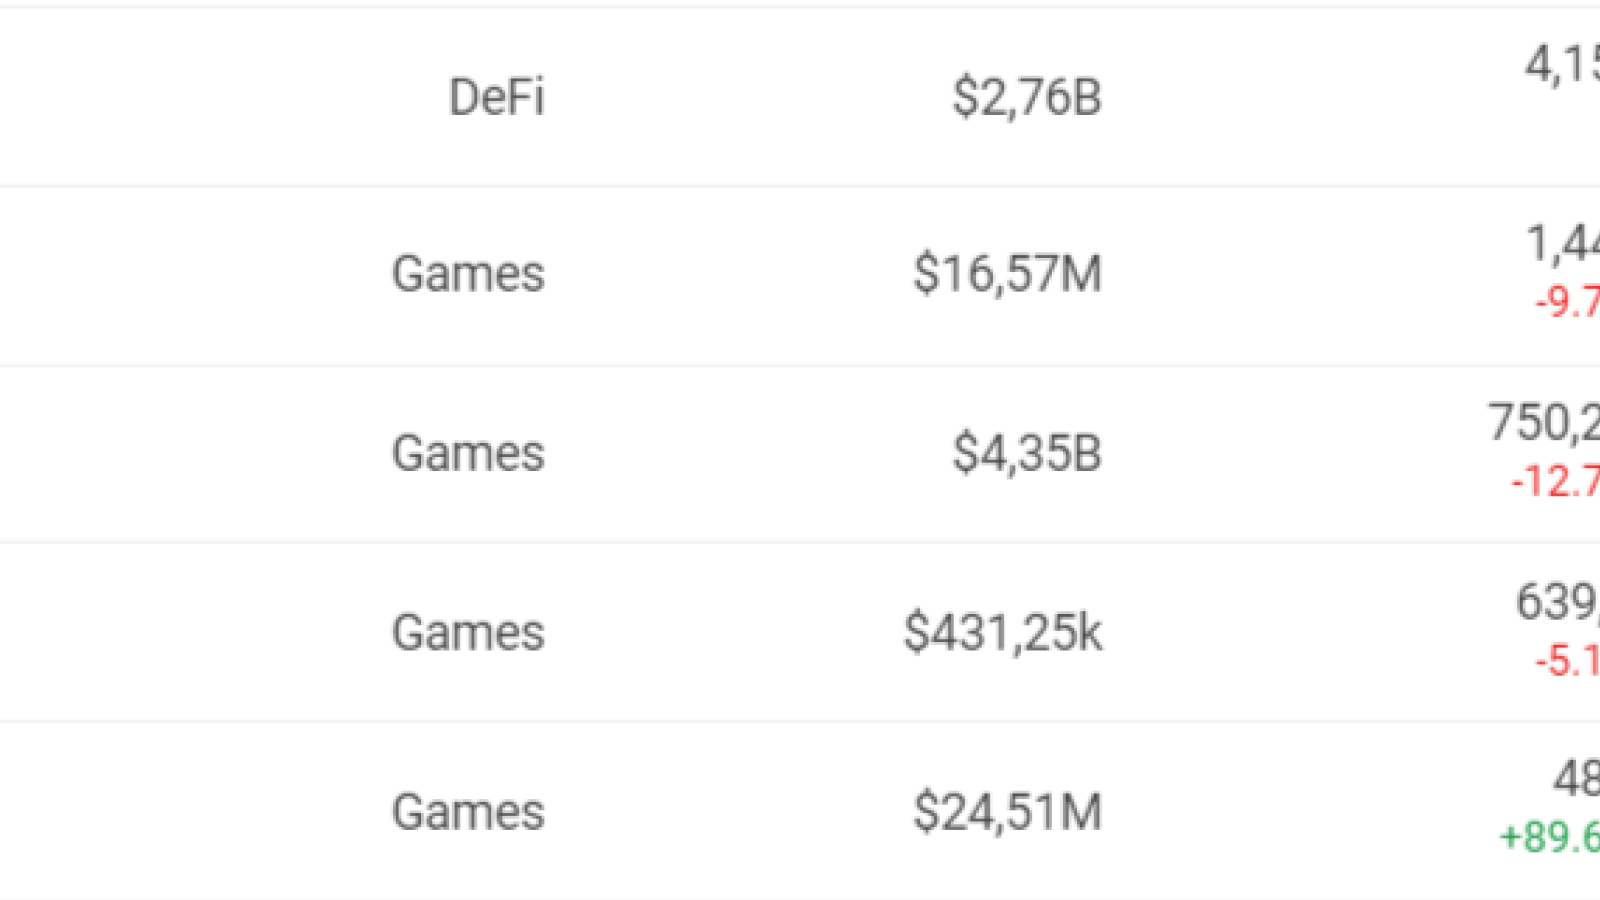 Axie Infinity is the third most popular dApp in the world